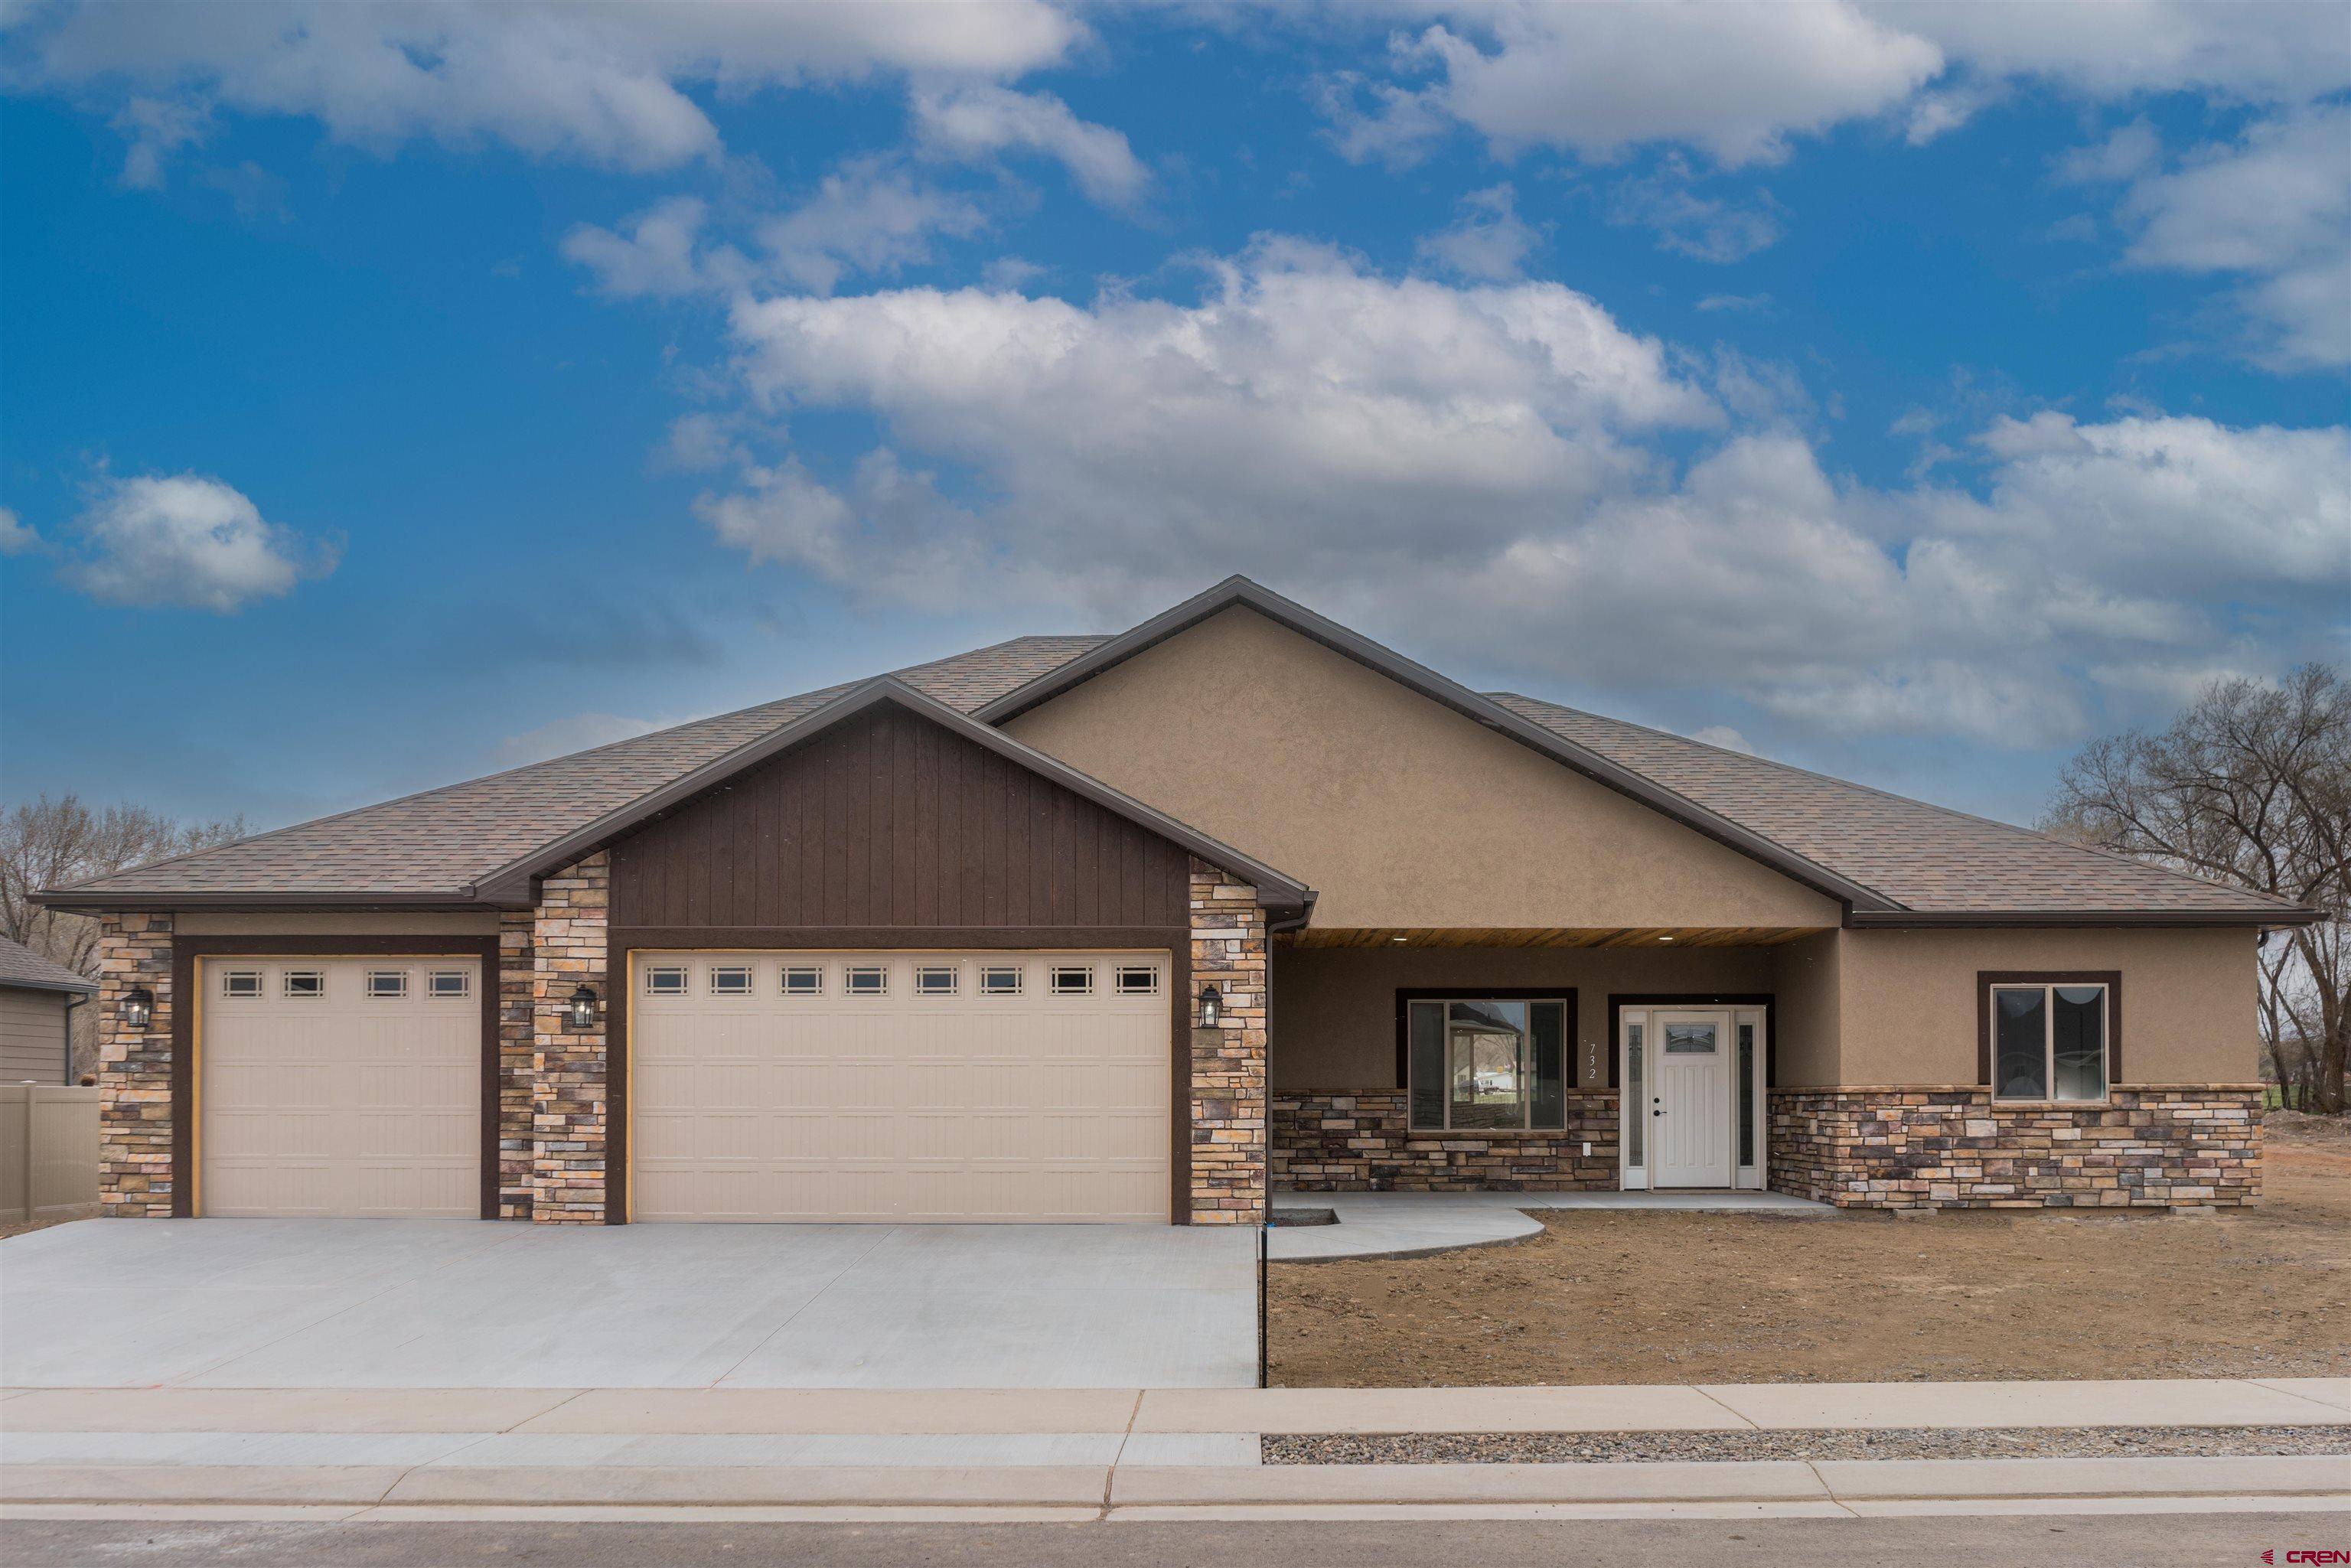 ANOTHER QUALITY HOME BY UNCOMPAHGRE VALLEY BUILDERS....New construction, in a well maintained neighborhood.   This home is approximately 2100 square ft., 4 bedroom, 2.5 baths, very open floorplan makes it easy for entertaining, family time, all that you are looking for.  Finishes will include custom cabinets, Stainless appliances, Breakfast bar area with dining, kitchen and living room all open areas.  Granite countertops throughout the home, Plank Vinyl flooring, carpet and tile.  Enjoy the covered patio in the back for your morning coffee and the covered front porch in the afternoon watching the sunsets.  Plenty of room for your vehicles and more with this large three (3) car garage.  If you move fast on this one, you could have some interior choices.  Home to be completed approximately March/April timeframe.  Schedule a tour and meet with the builder.